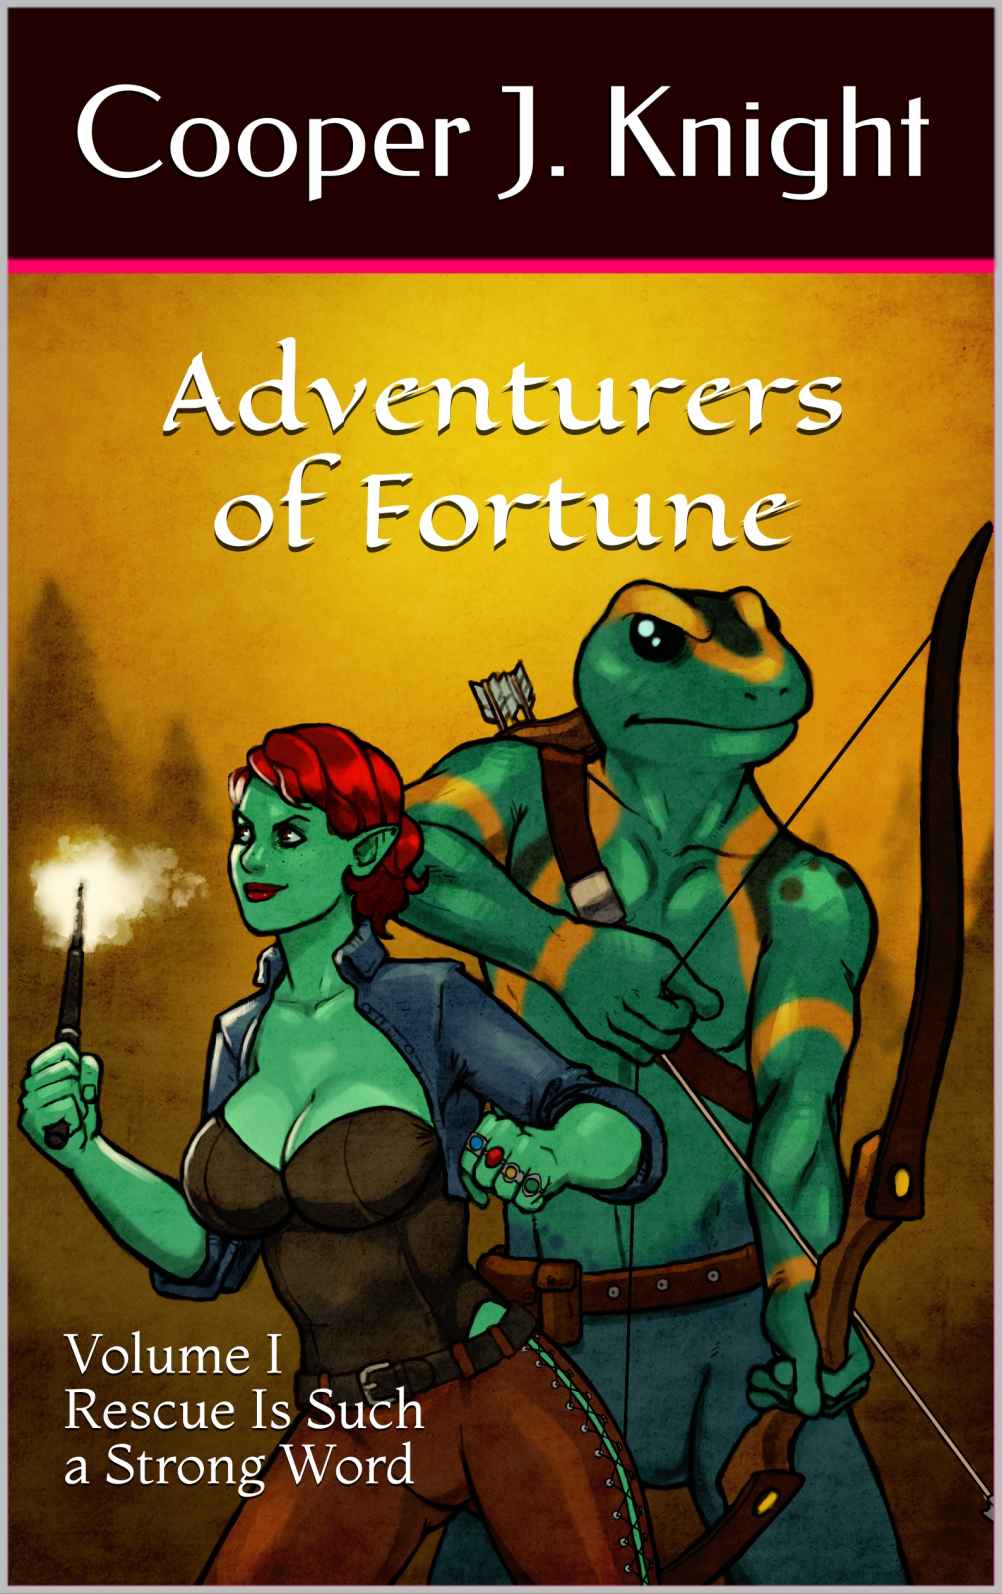 Adventurers of Fortune: Rescue Is Such a Strong Word by Cooper J. Knight